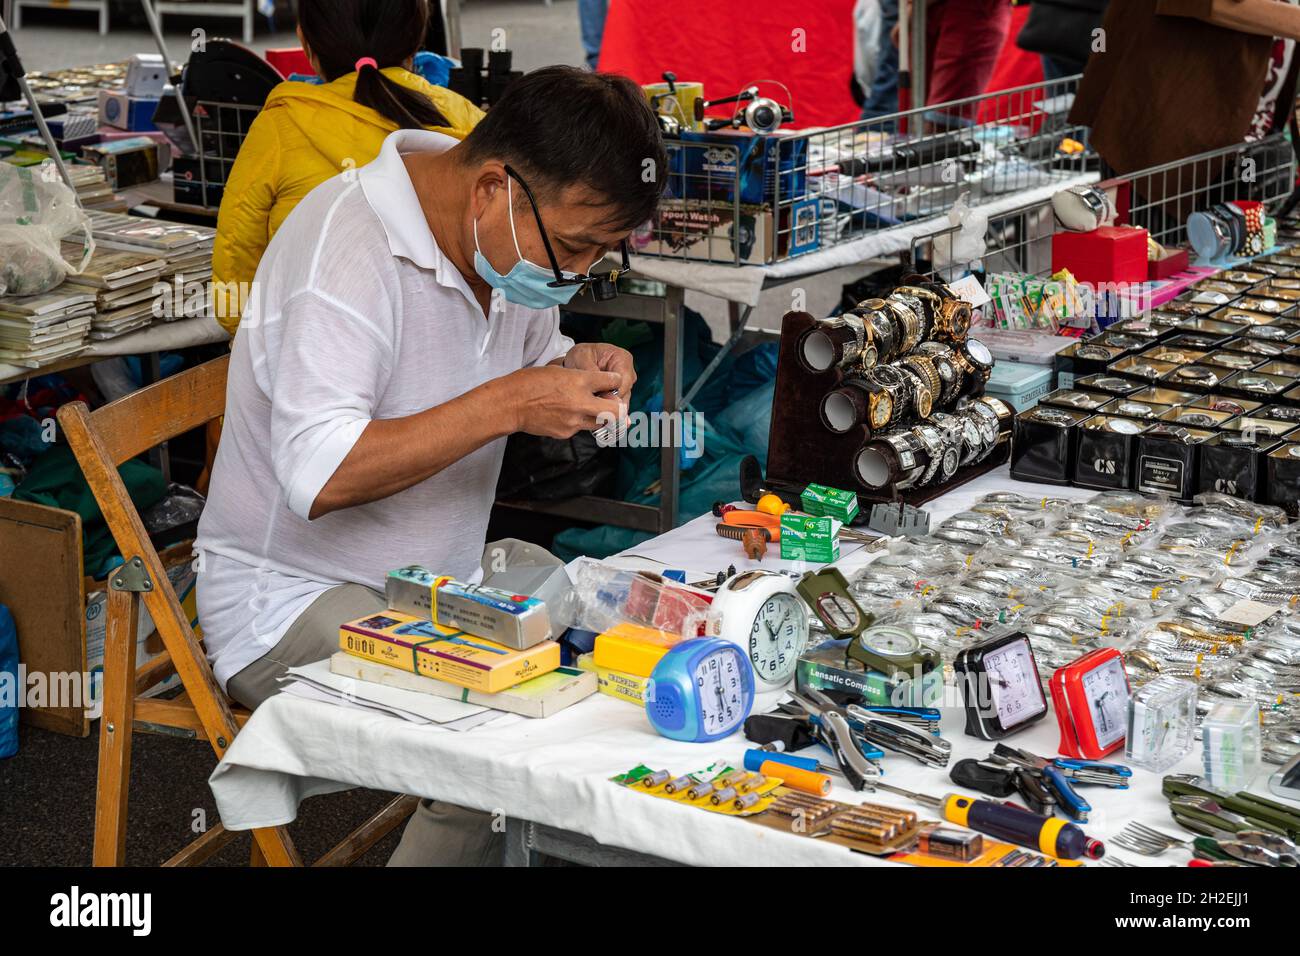 Street vendor selling clocks and watches at Mercato di Porta Portese street market in Trastevere district of Rome, Italy Stock Photo